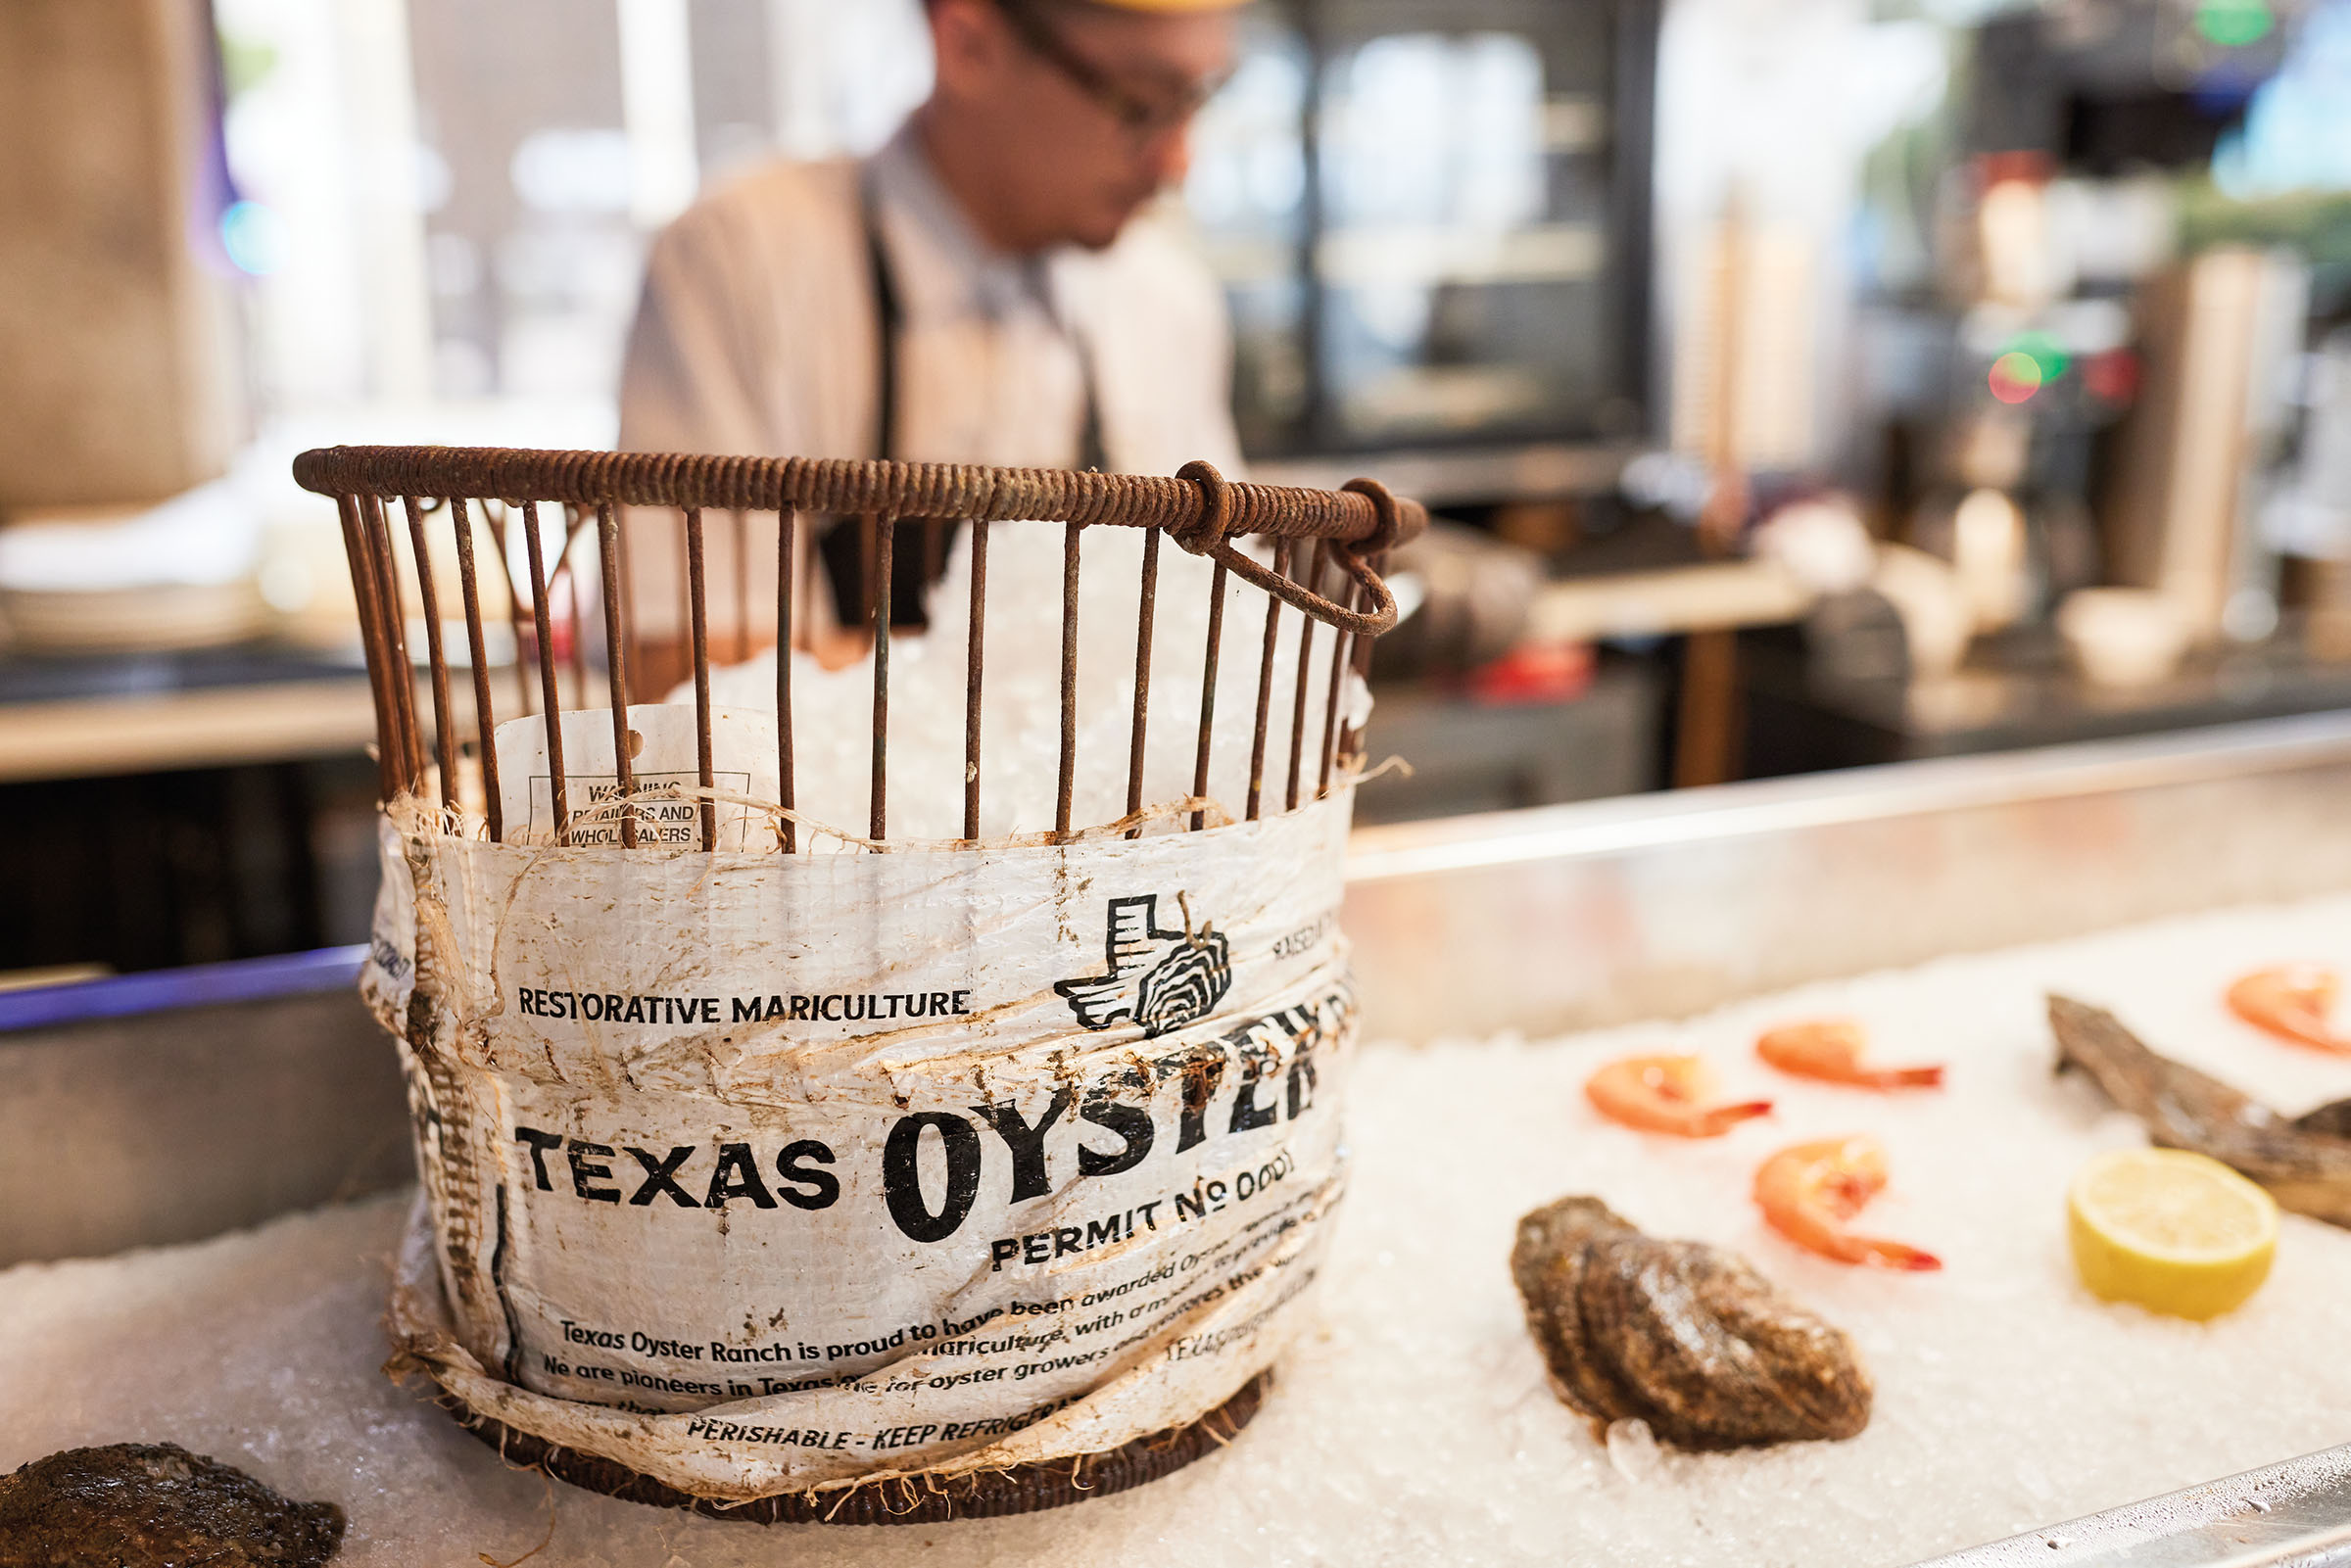 A small wooden basket with a wrapper reading "Texas Oysters" in the foreground, a man shucks oysters and works with other seafood in the background